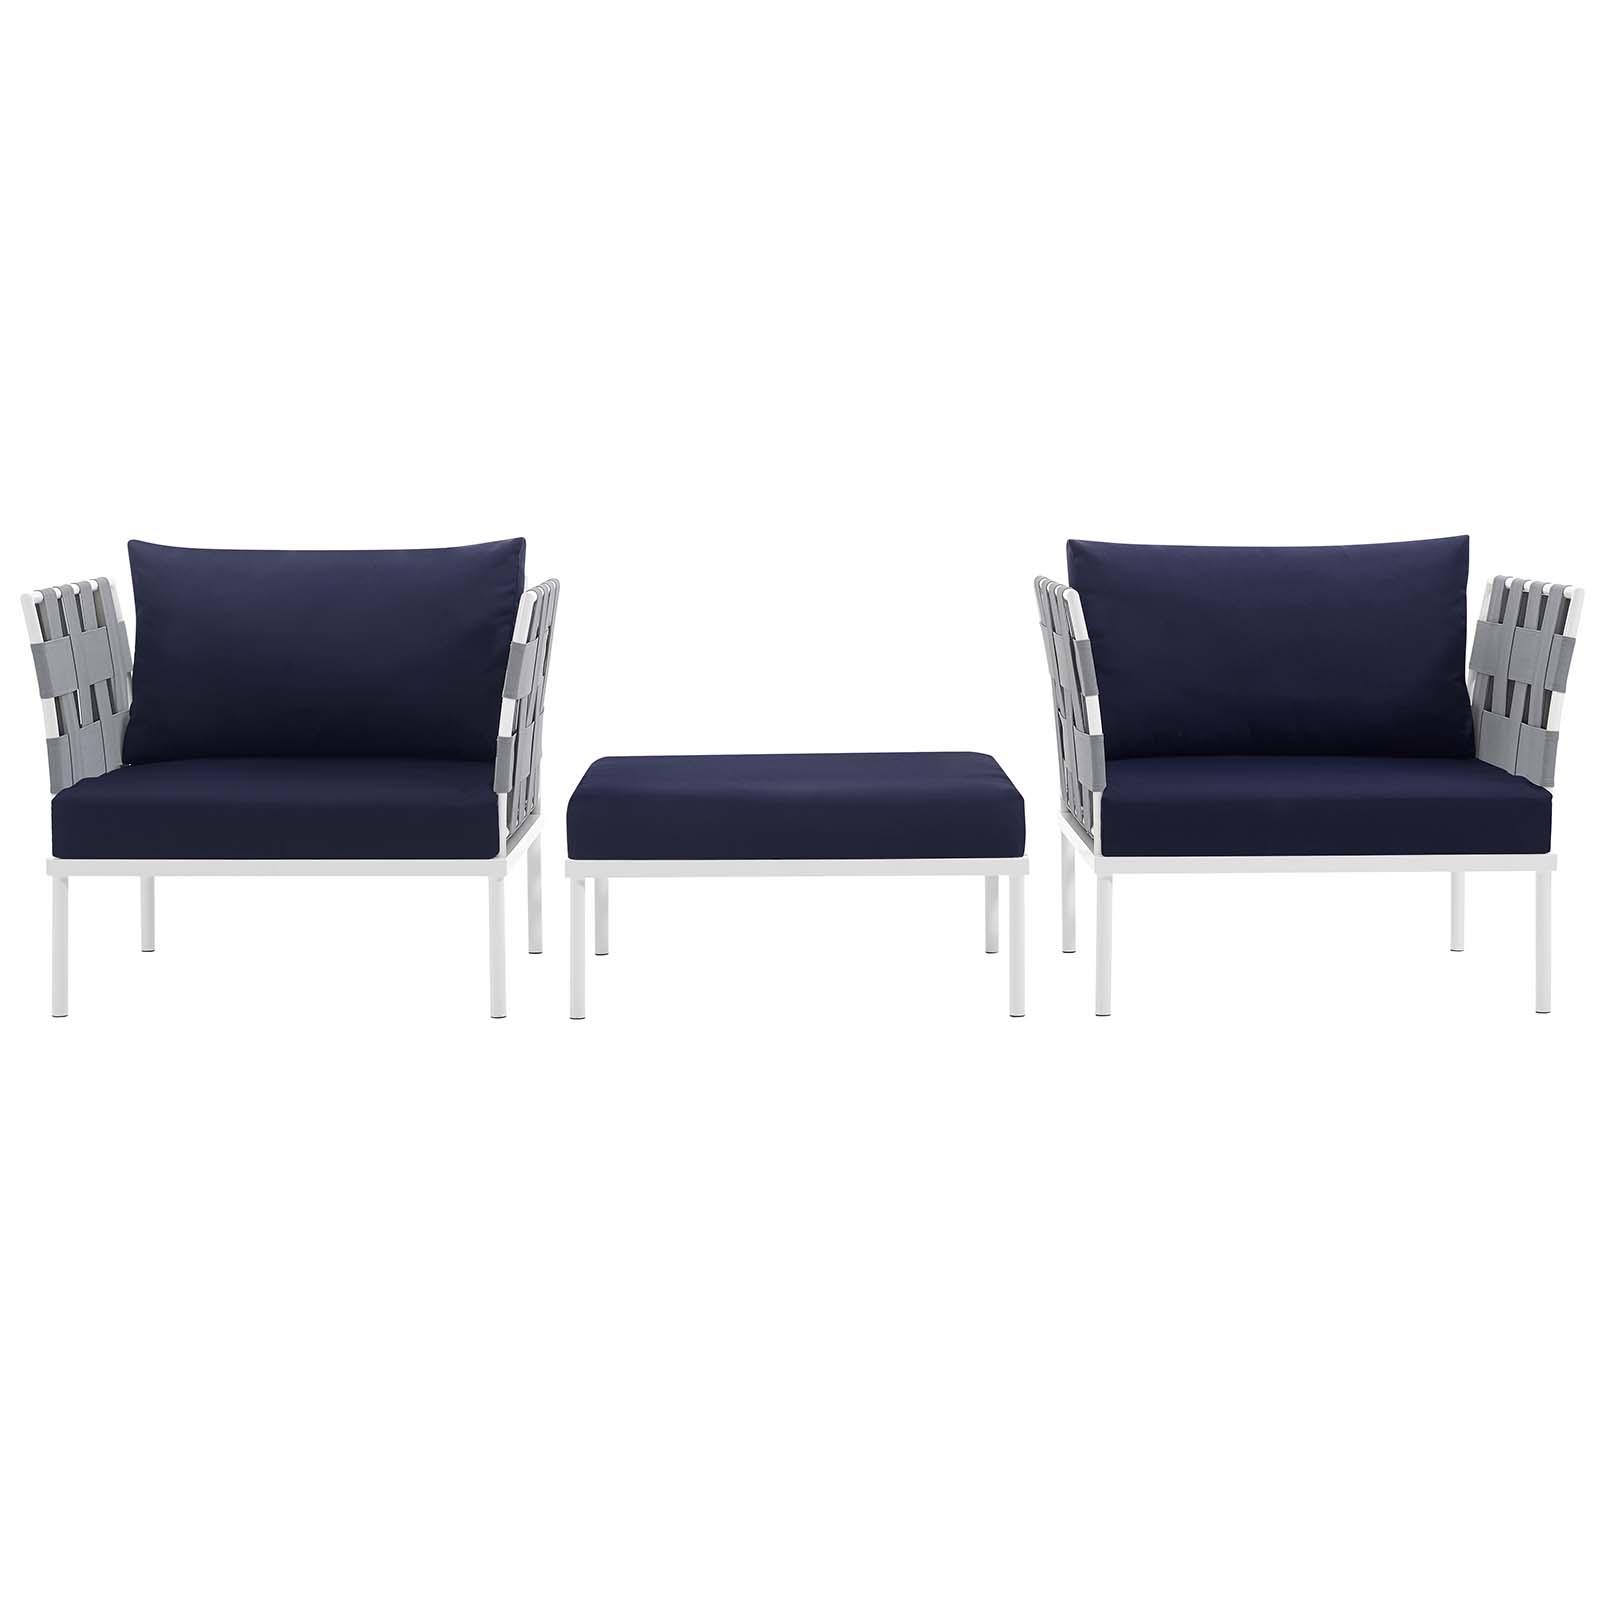 Modway Harmony 3 Piece Outdoor Patio Aluminum Sectional Sofa Set in White Navy - image 4 of 6